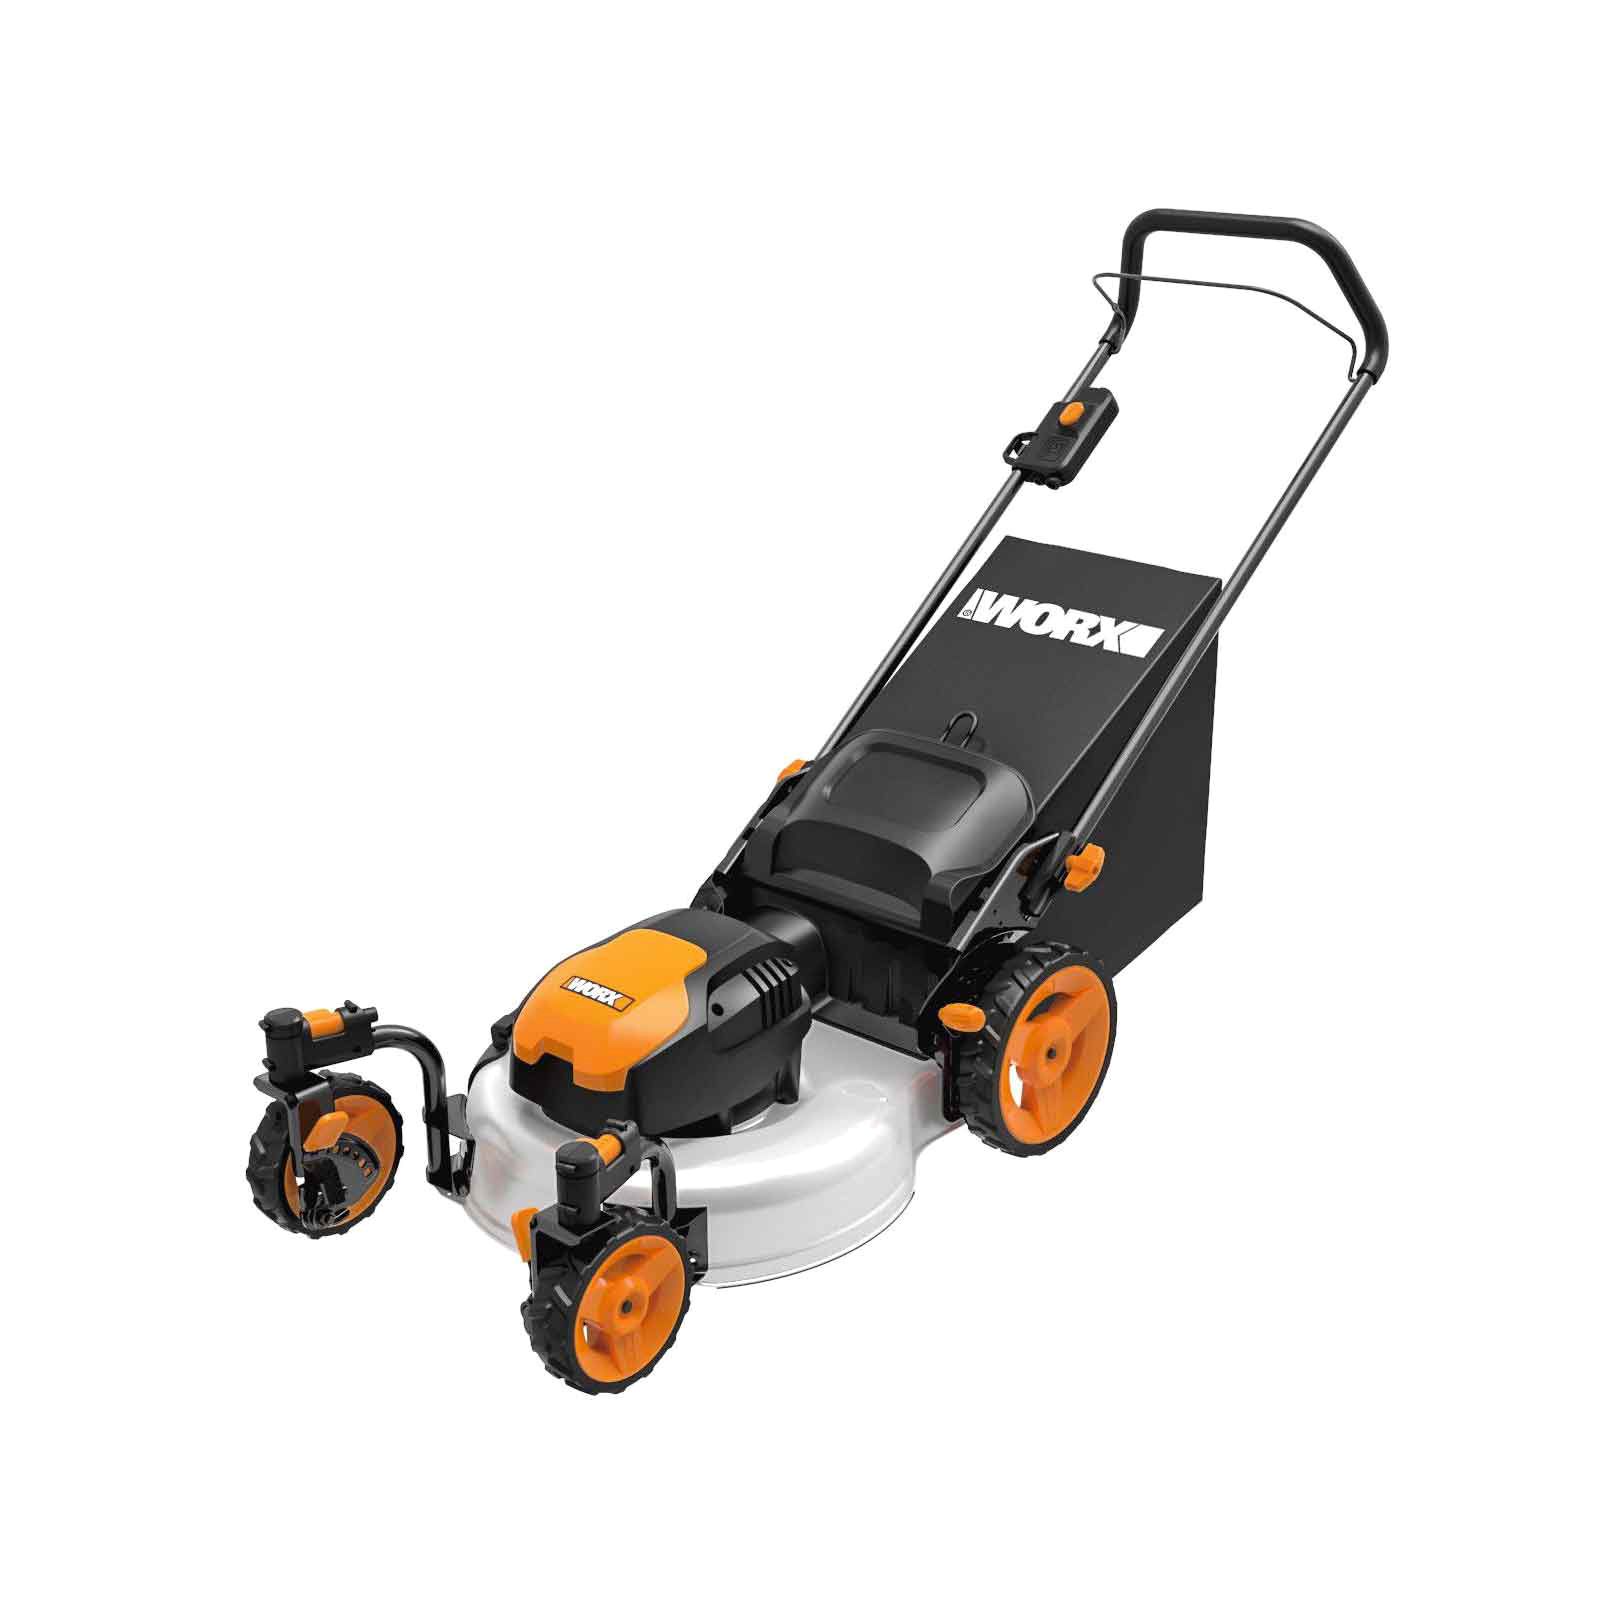 Worx WG719 19'' 13A Electric Lawn Mower with Caster Wheels